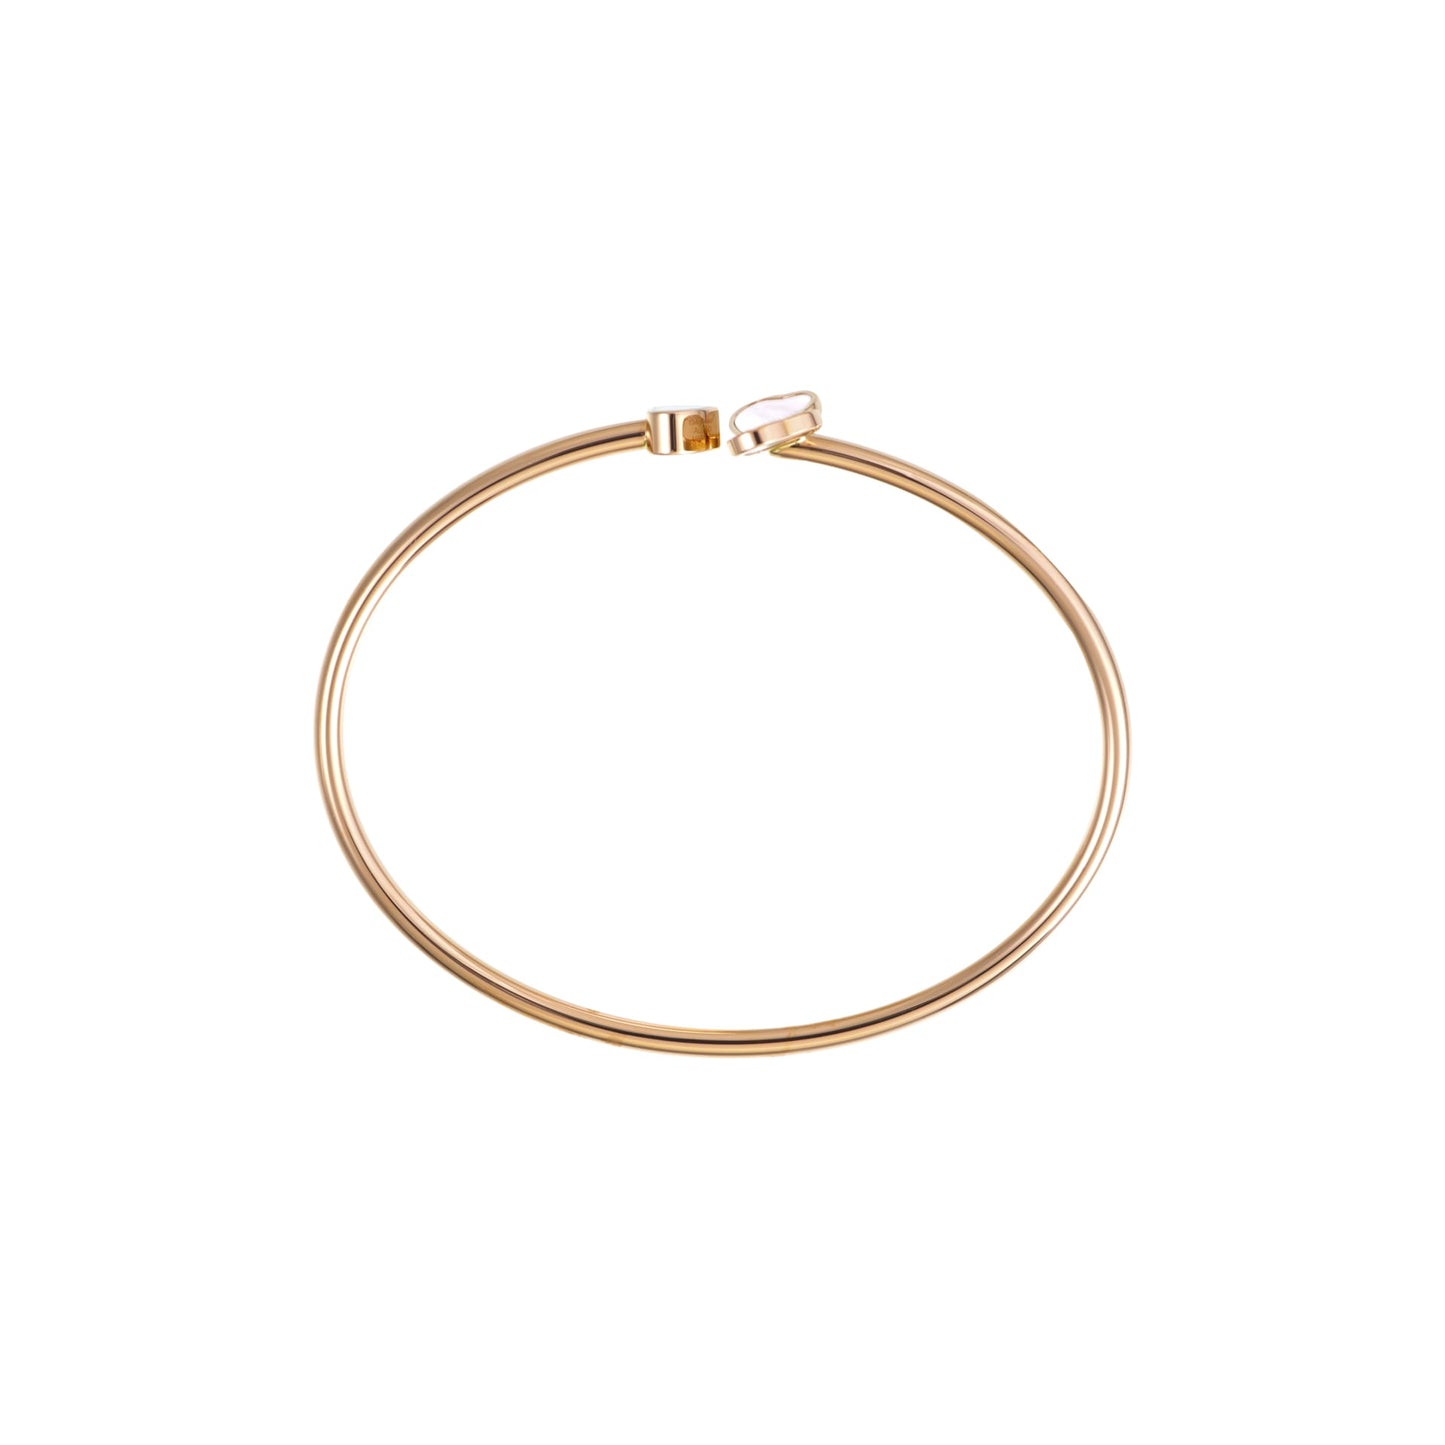 HAPPY HEARTS WINGS BANGLE, ETHICAL ROSE GOLD, DIAMOND, MOTHER-OF-PEARL 85A083-5300